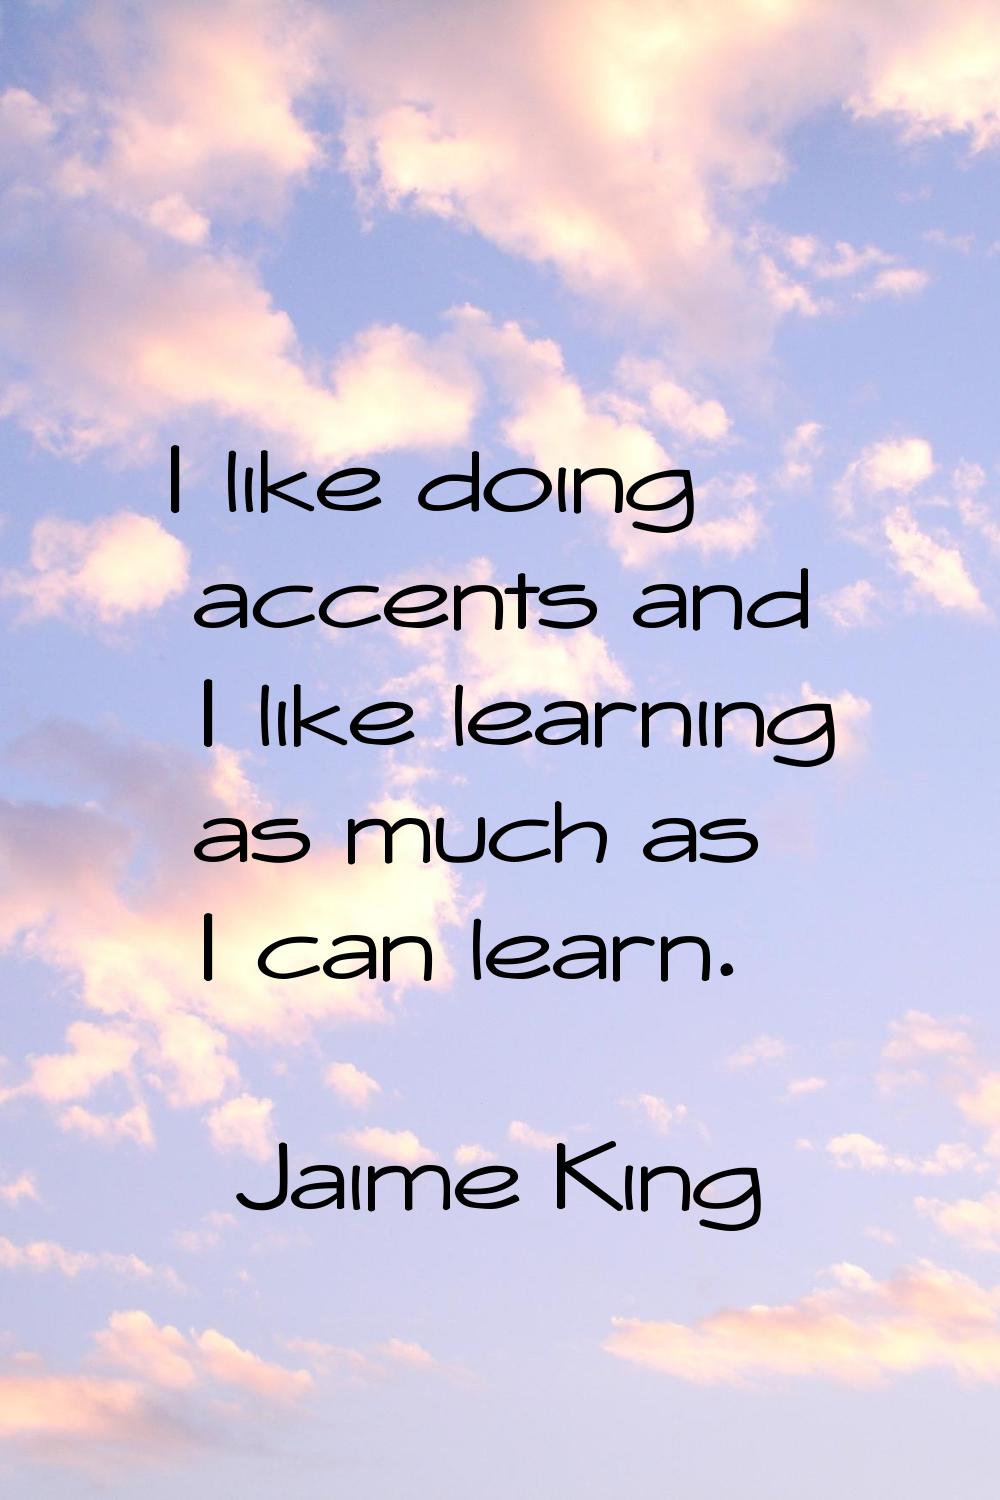 I like doing accents and I like learning as much as I can learn.